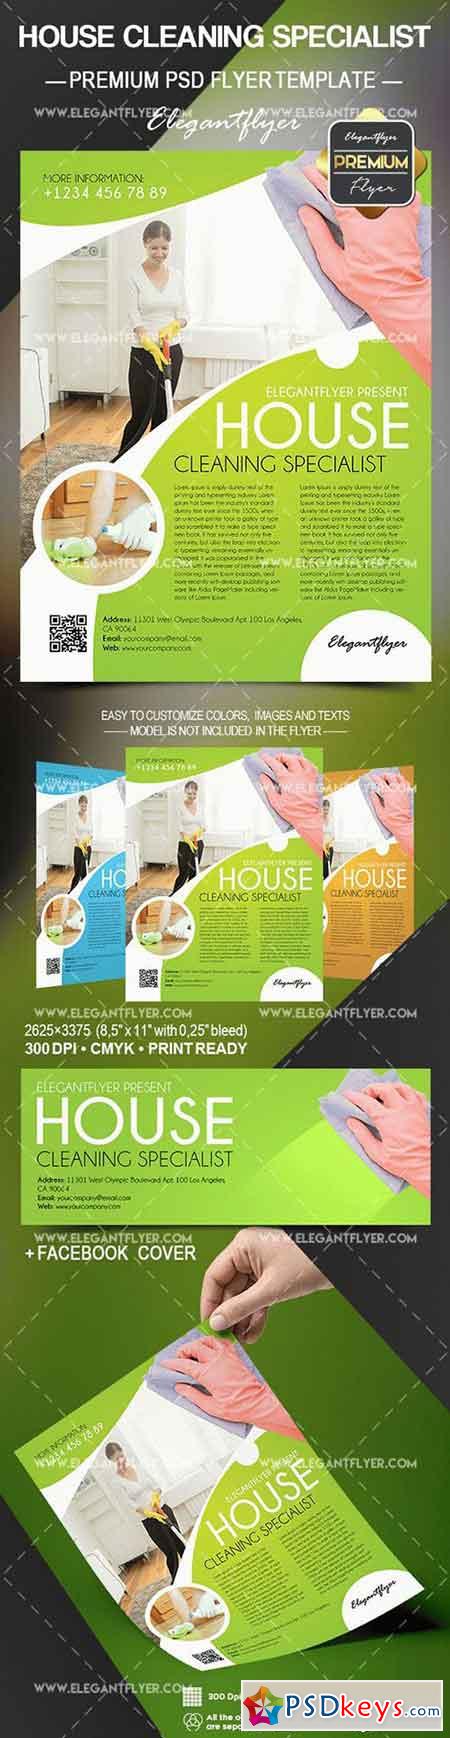 House Cleaning Specialist  Flyer PSD Template + Facebook Cover